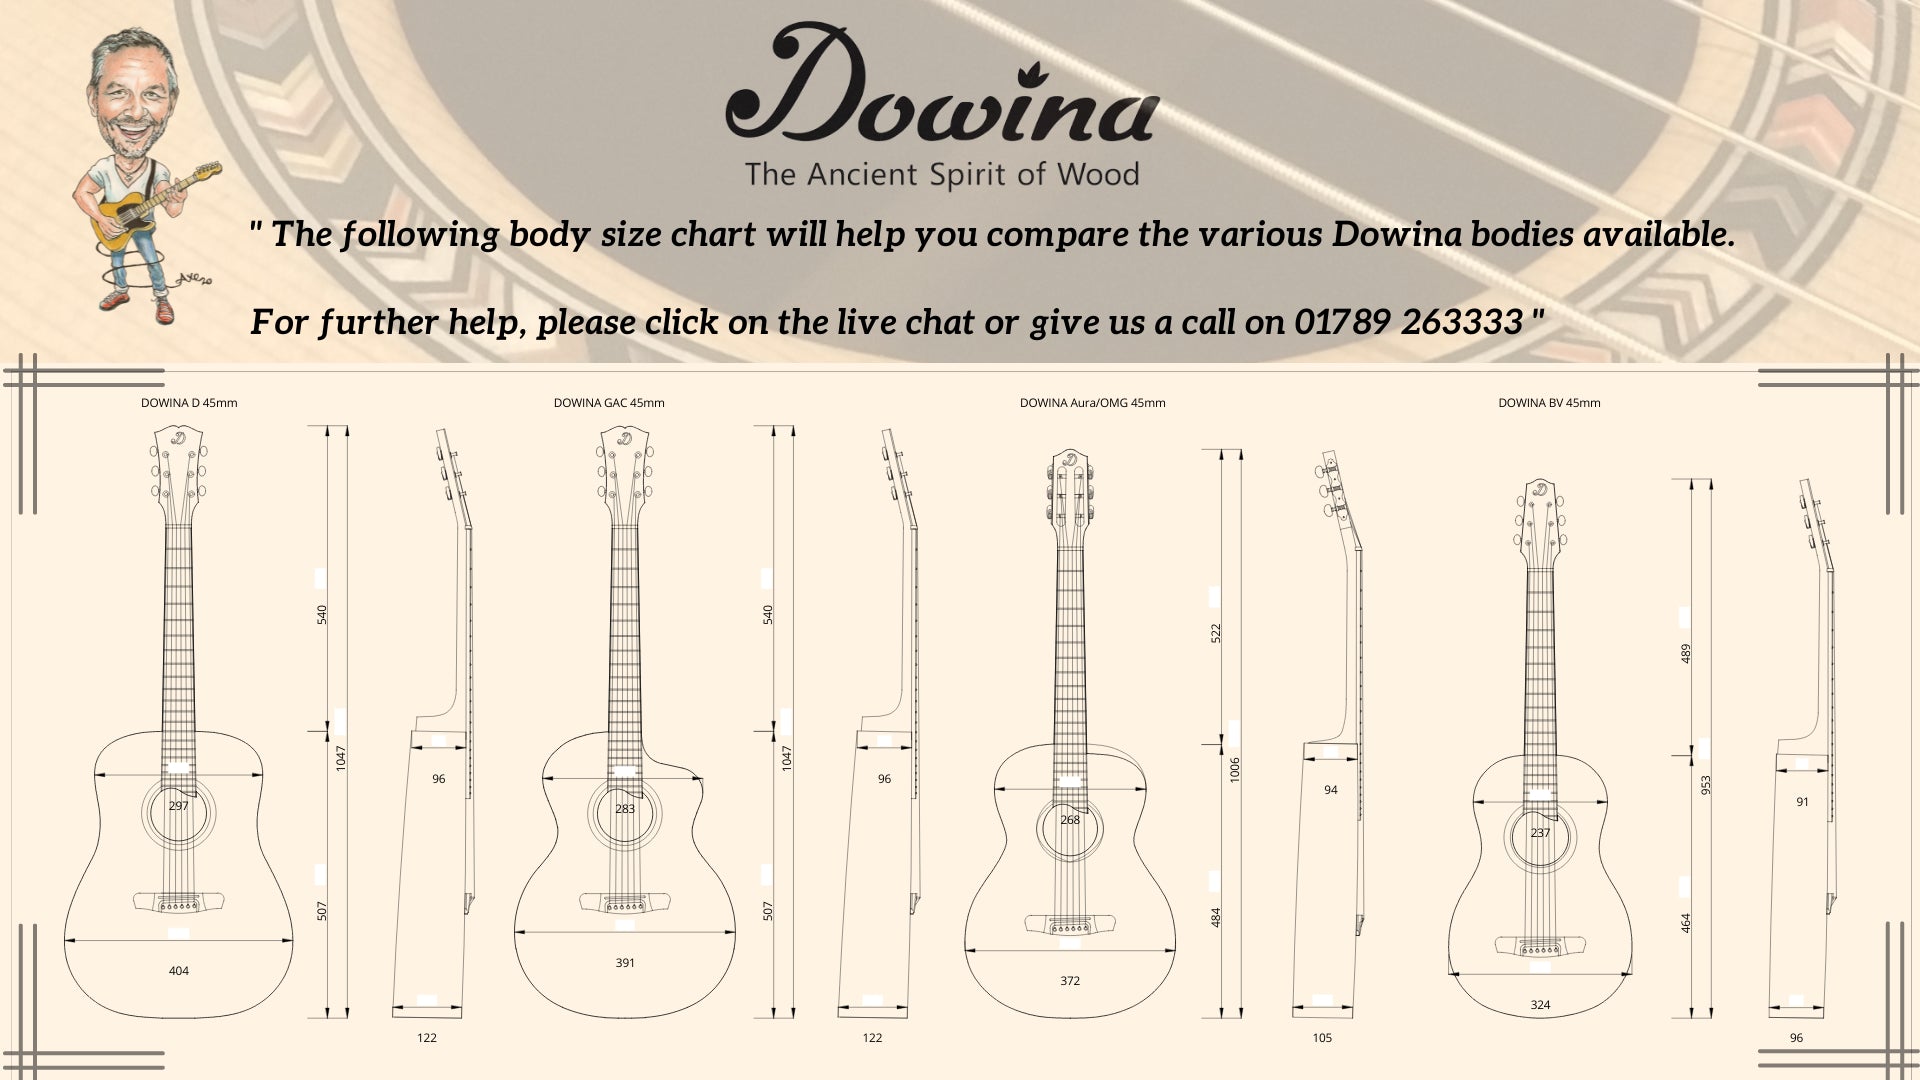 Dowina Rosewood (Ceres) HC DS Hybrid Nylon String Cutaway, Nylon Strung Guitar for sale at Richards Guitars.